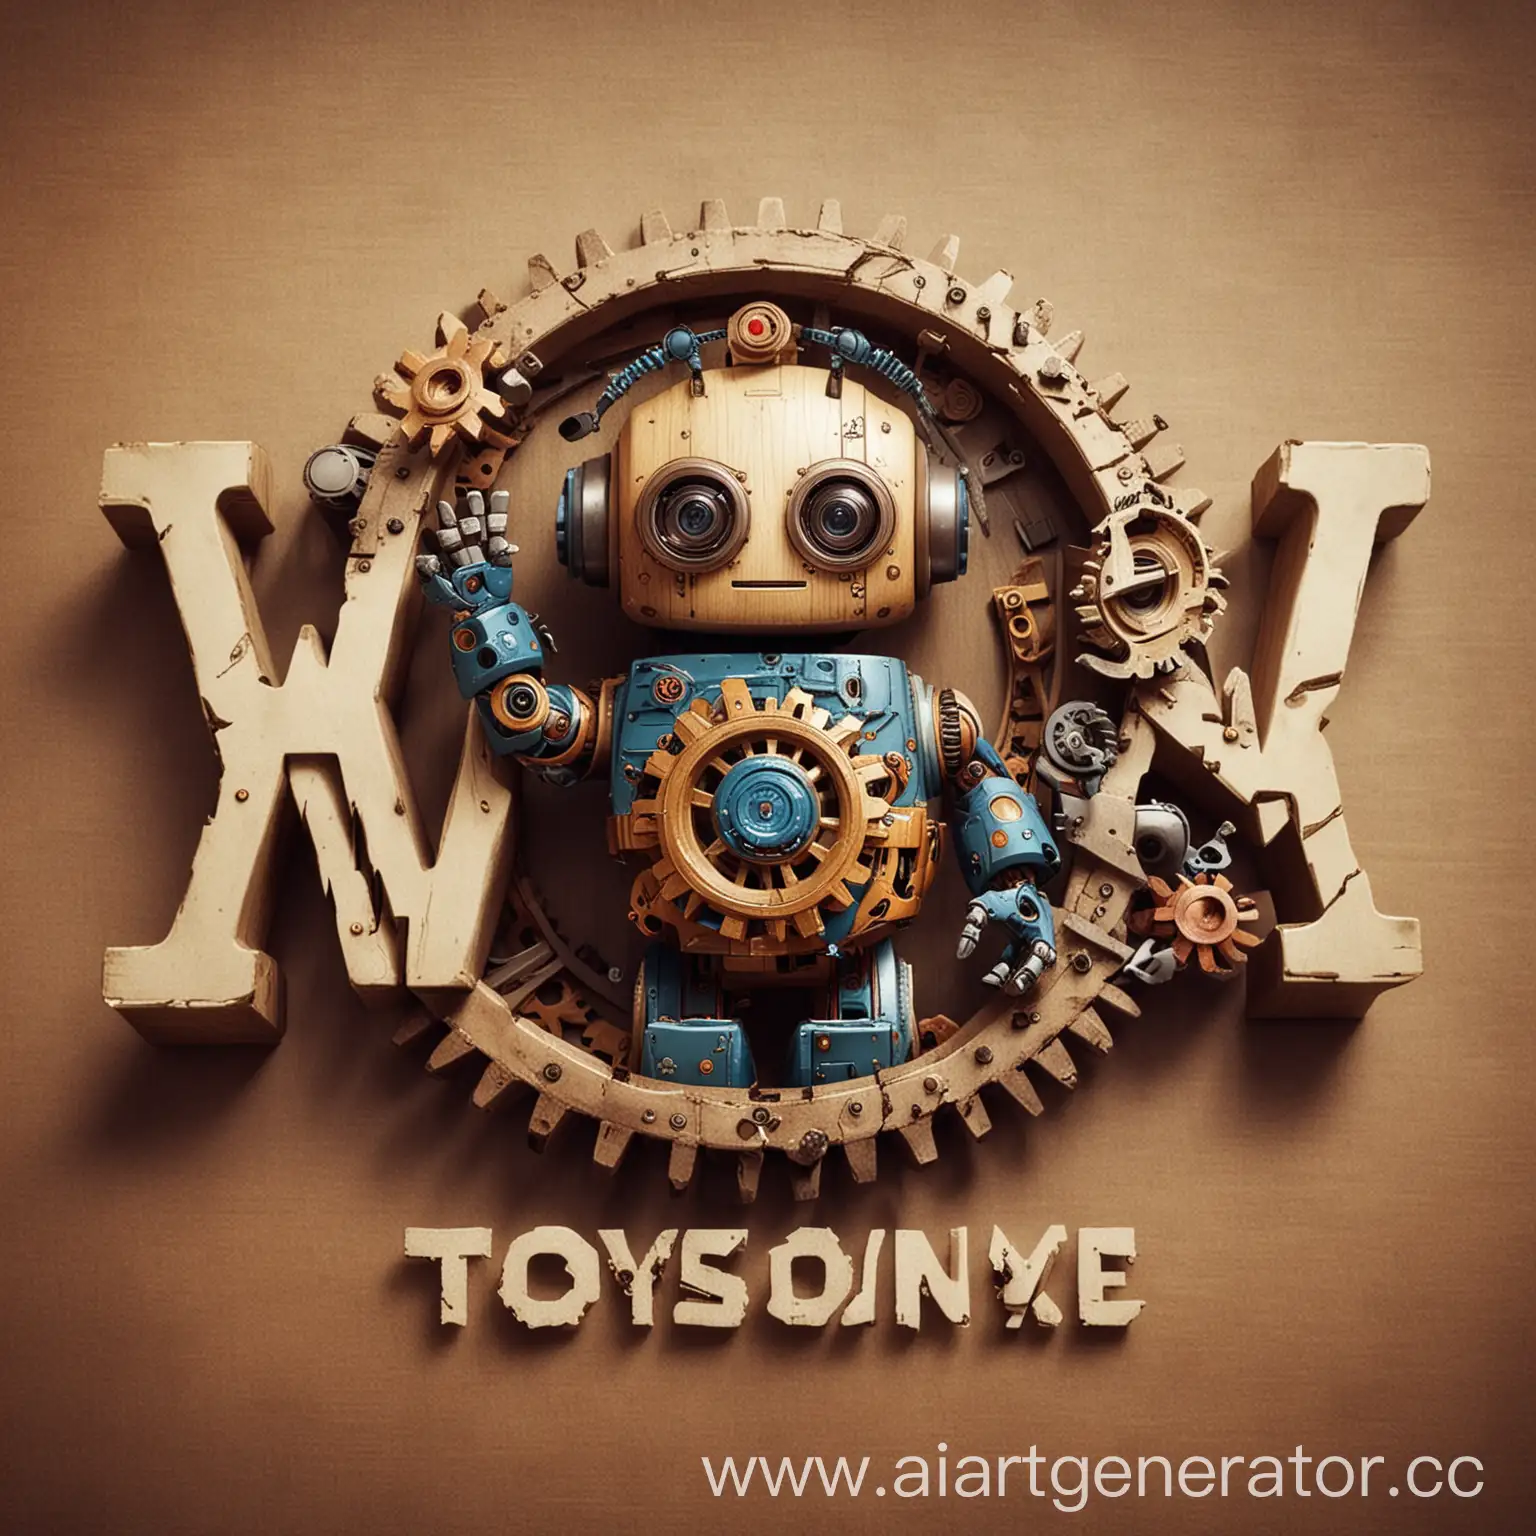 Global-Toy-Exploration-Mini-Robot-and-Gear-Logo-Design